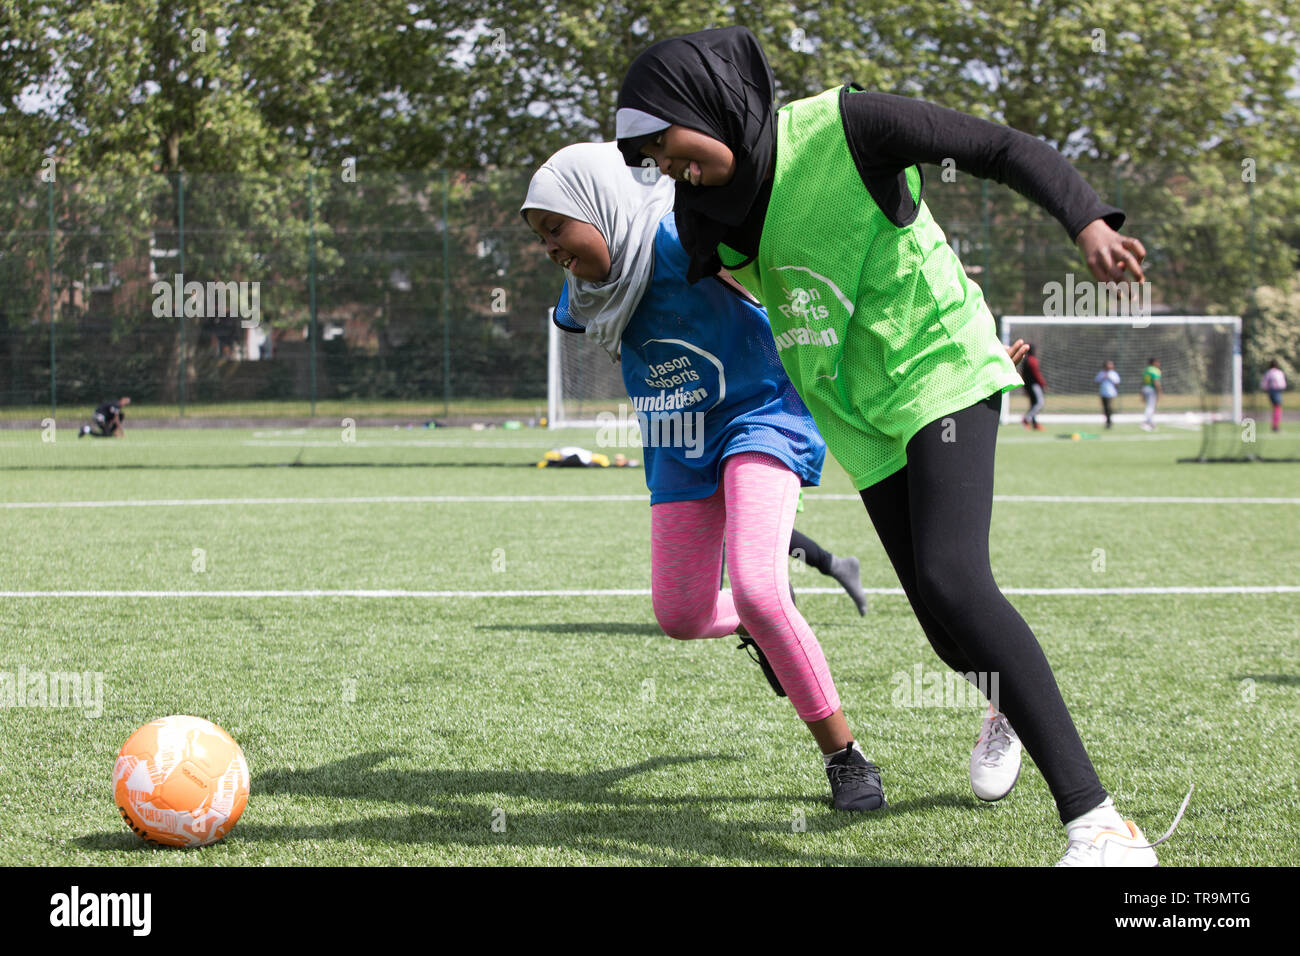 Muslim girls playing football on an astroturf training pitch. They are wearing hijabs (headscarves). Stock Photo